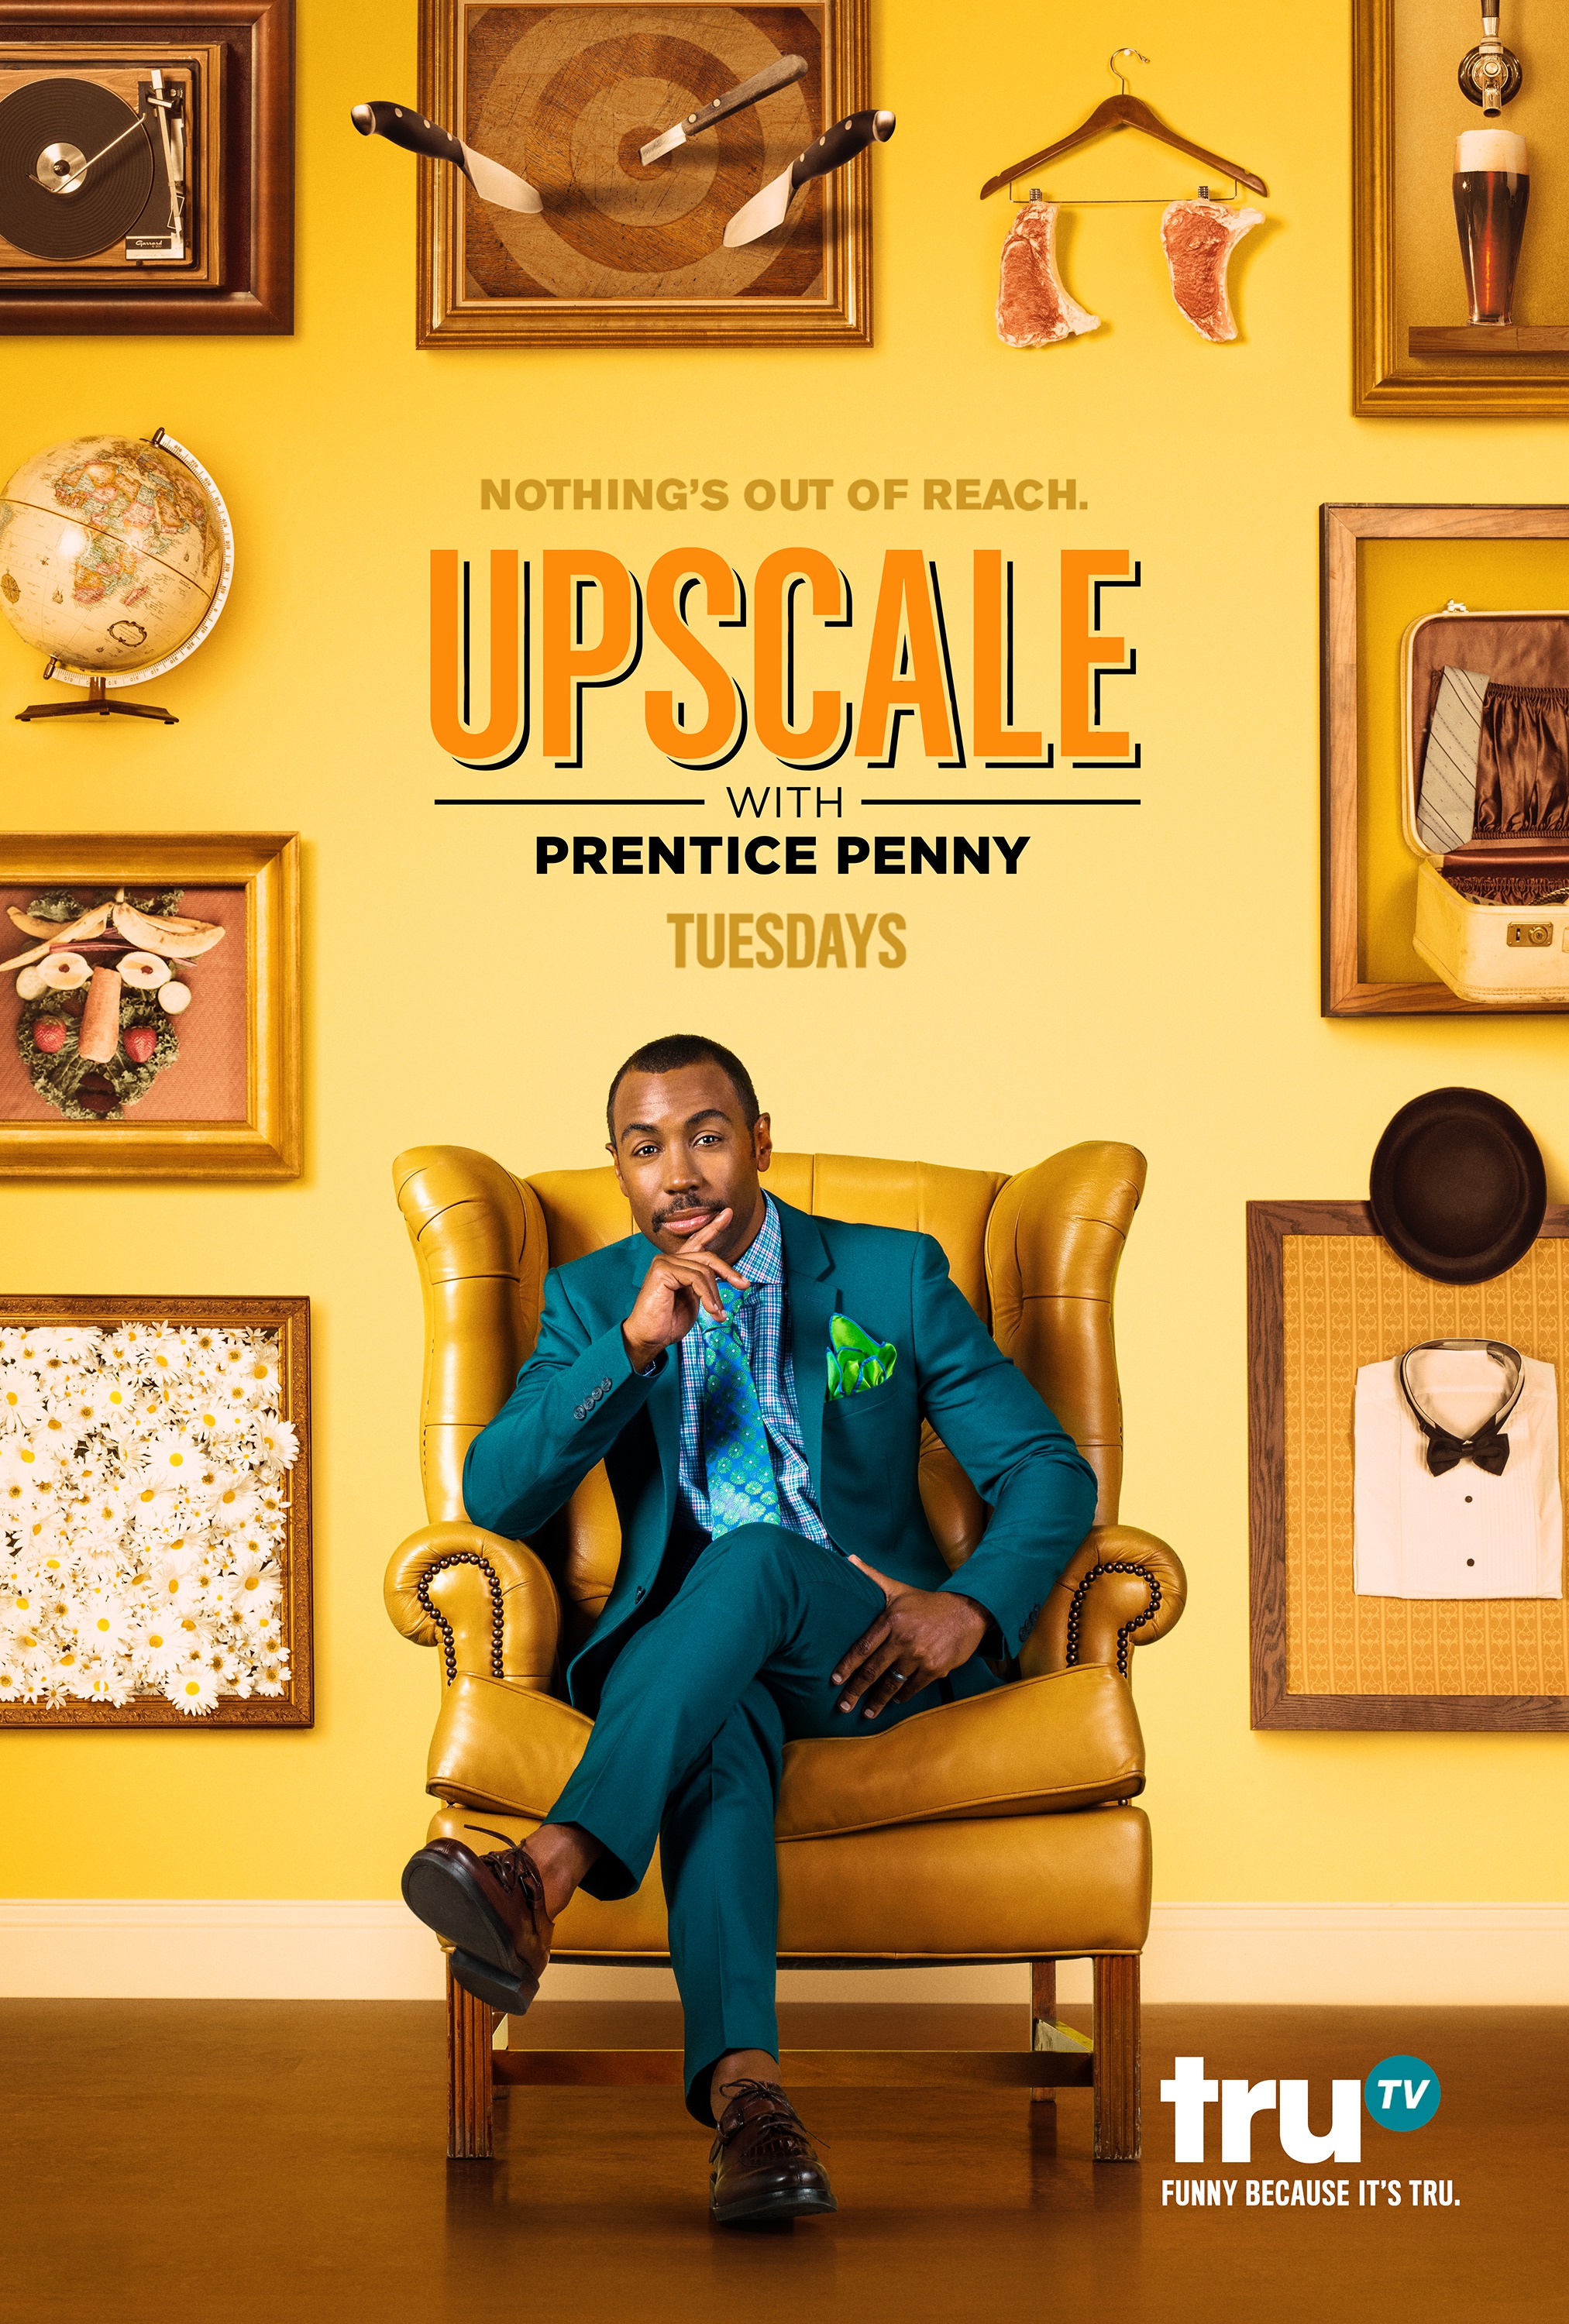 Mega Sized TV Poster Image for Upscale with Prentice Penny 